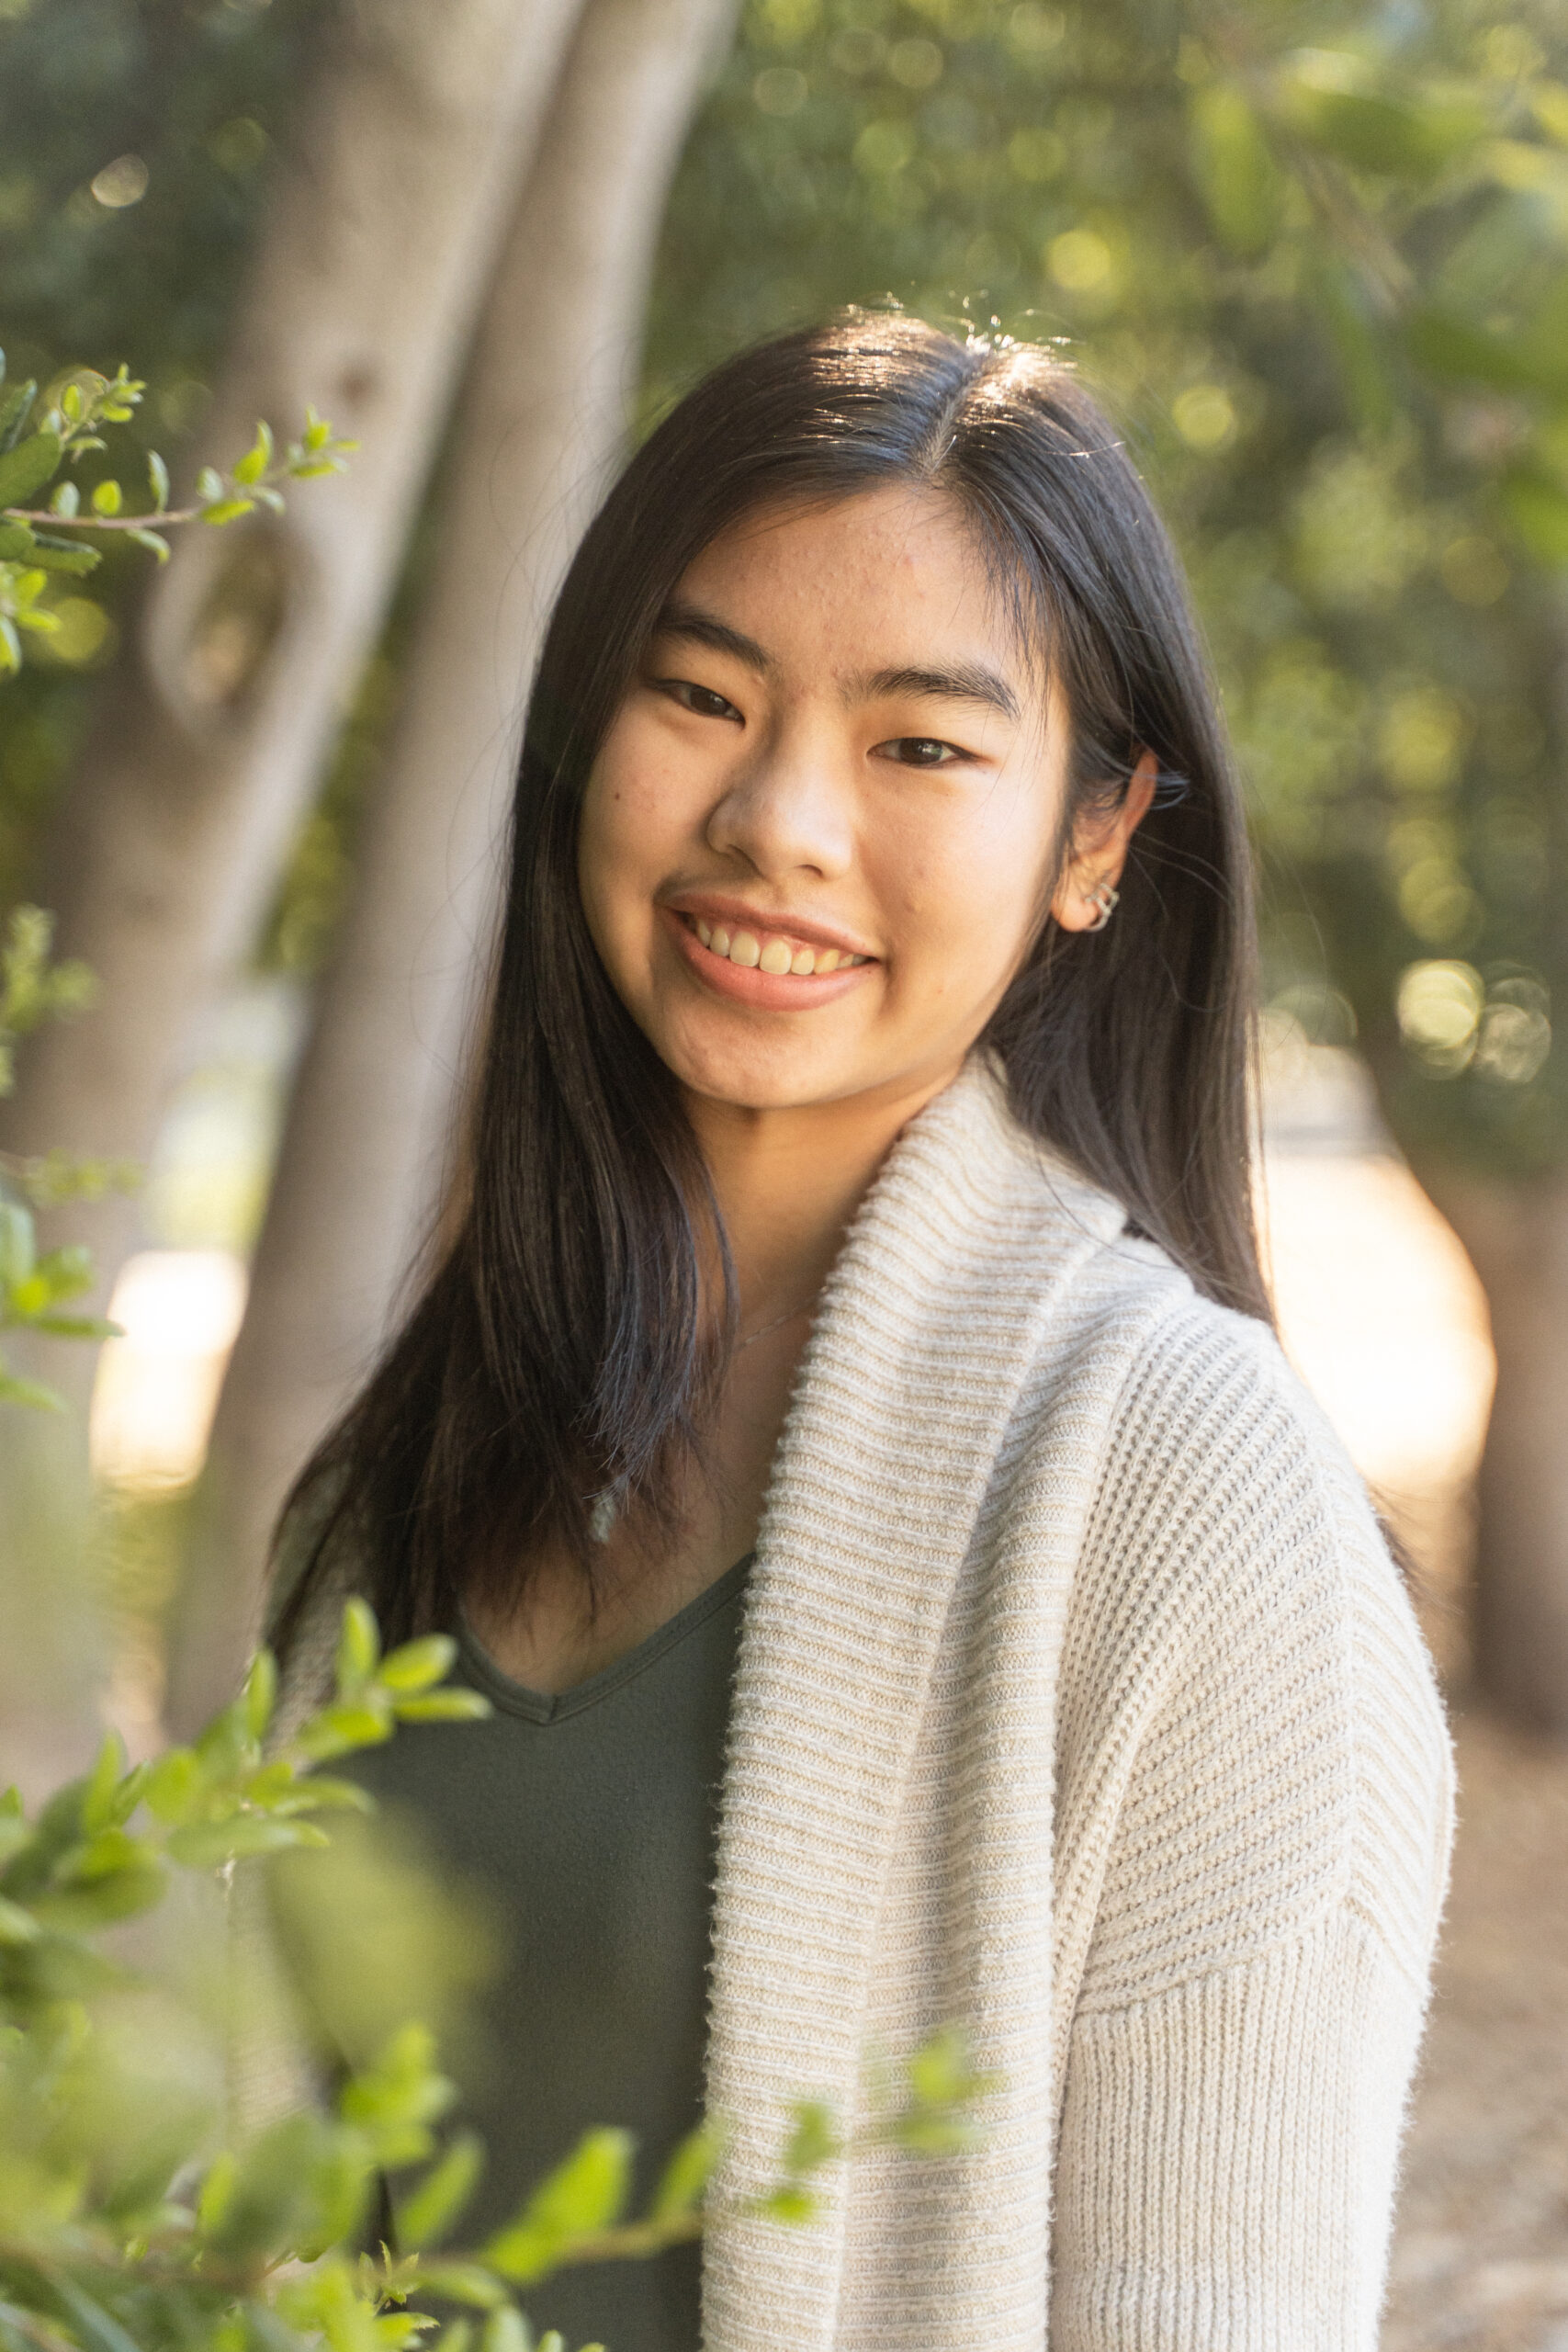 Ianna Zhu's headshot. Ianna poses outdoors with some leaves in front of her and a large tree behind her. She wears a cream-colored cardigan over a green shirt and has long straight black hair.